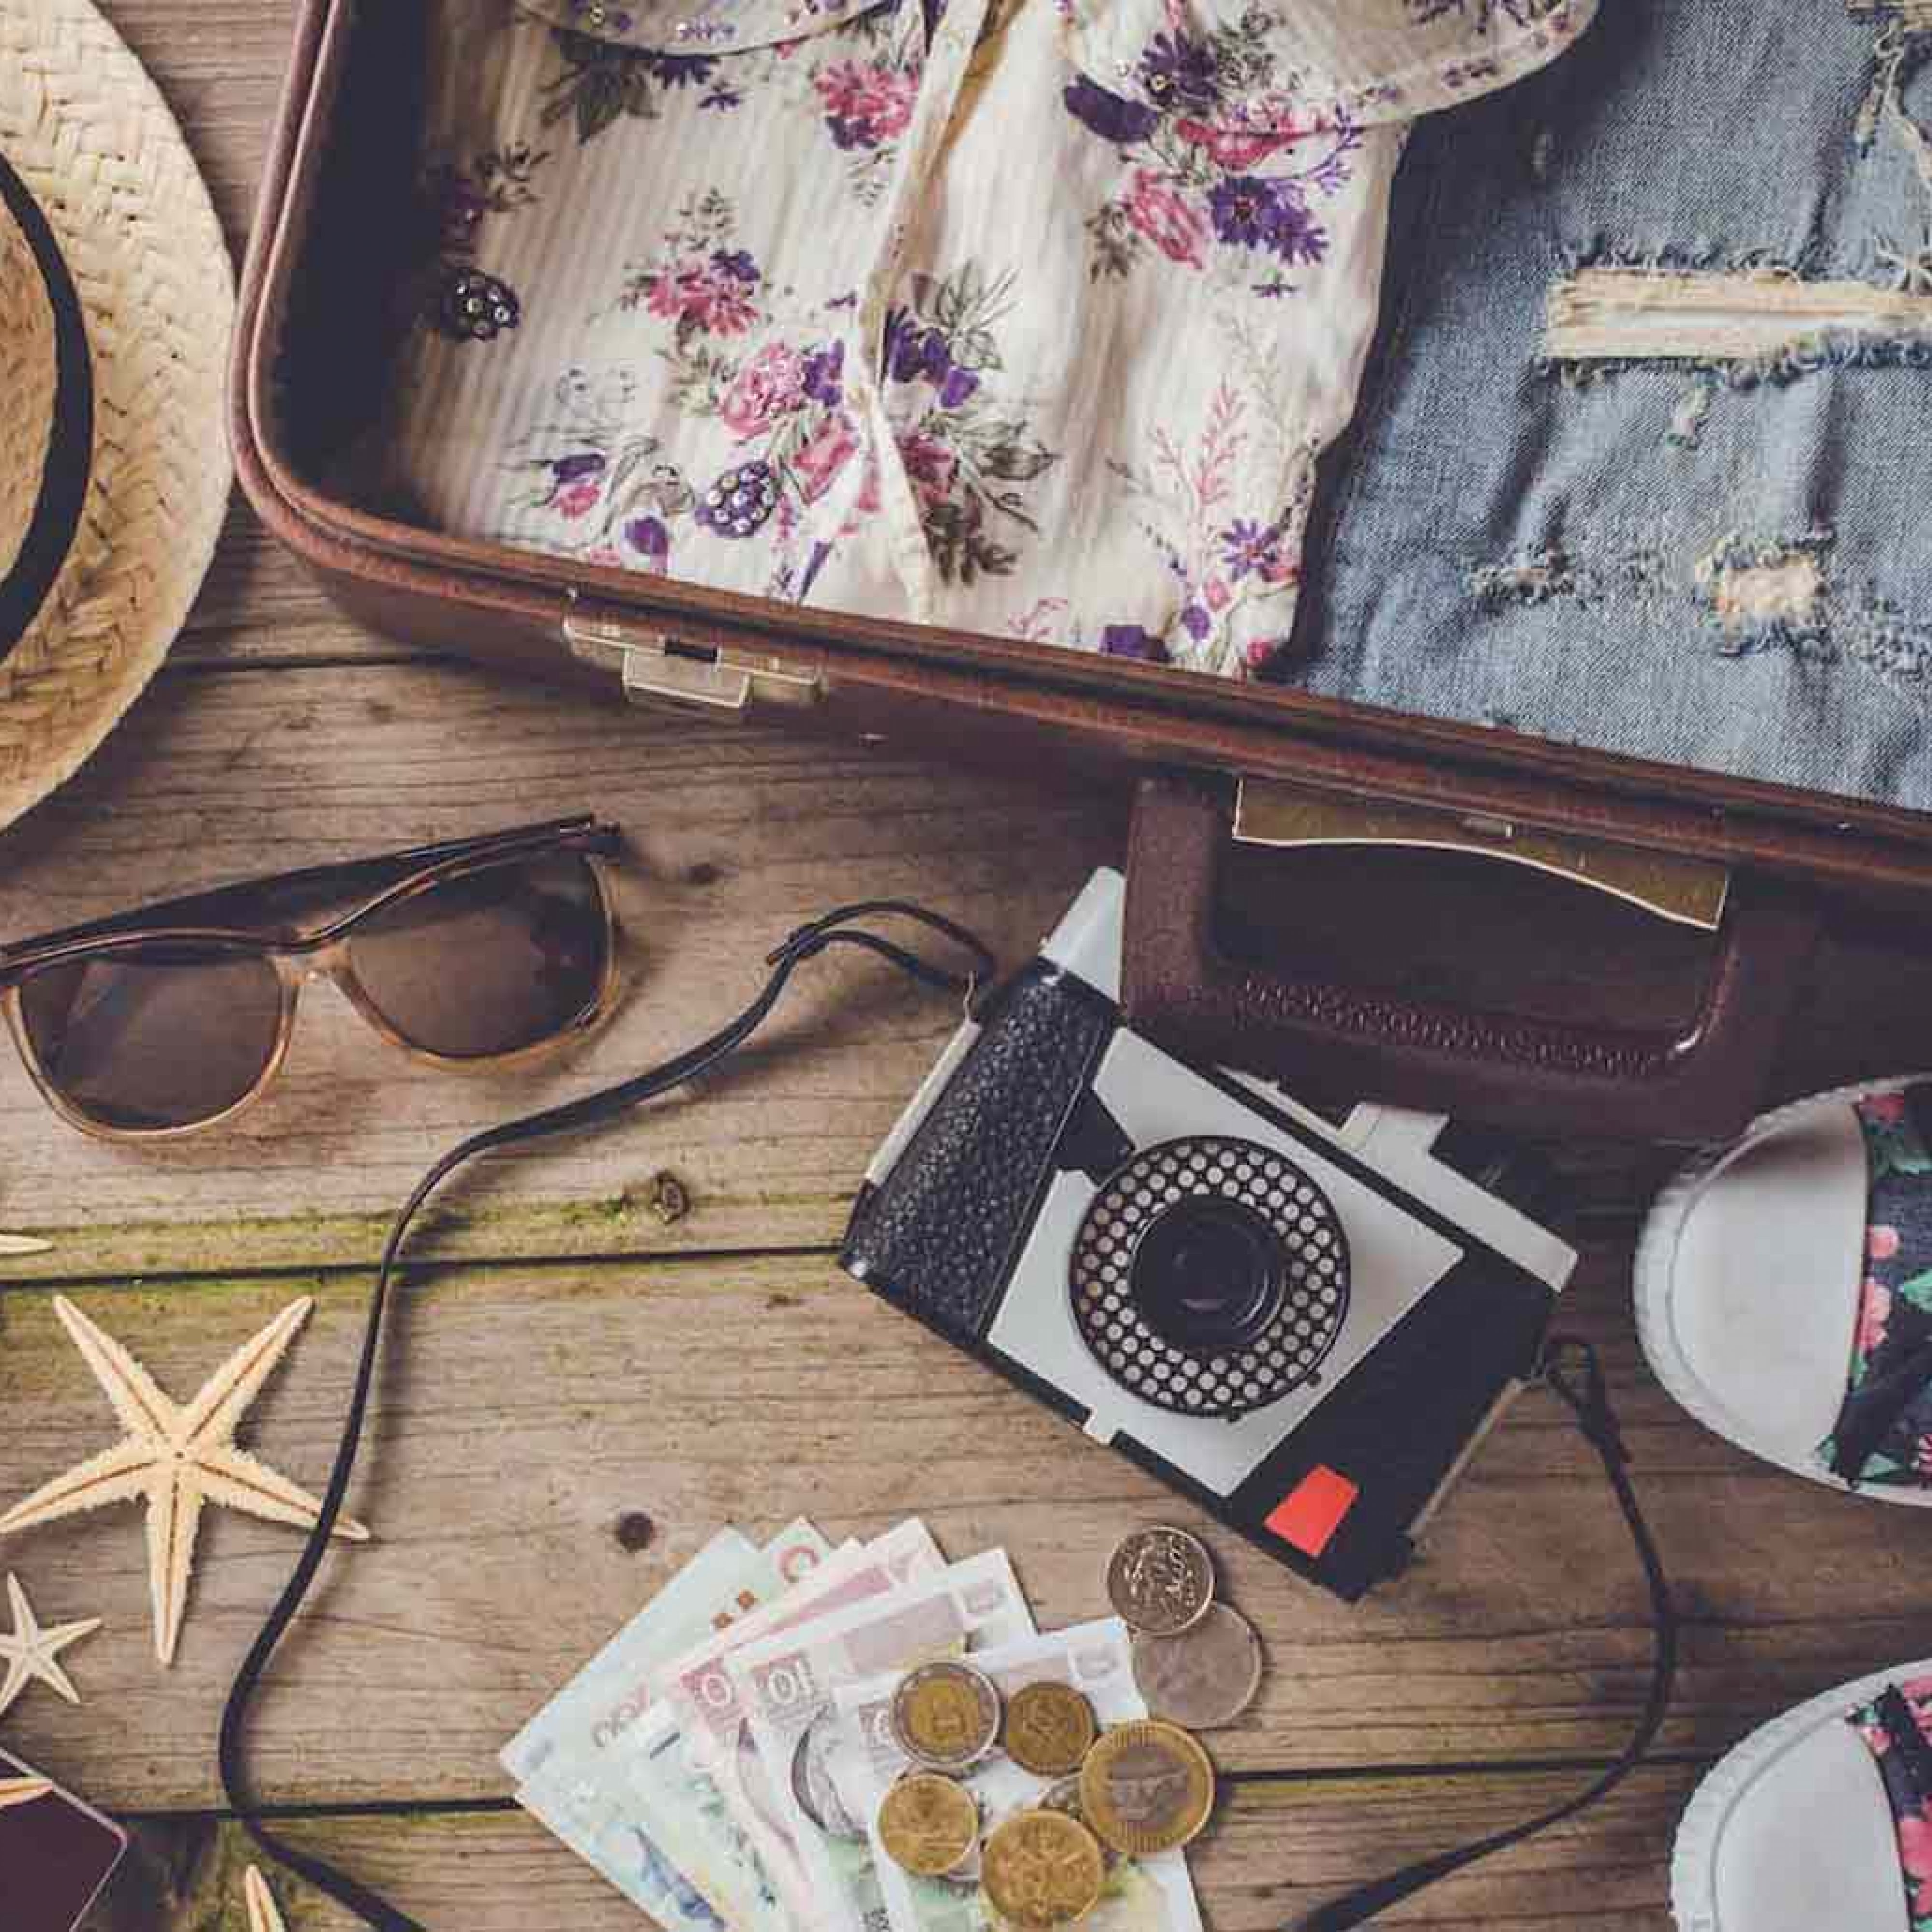 10 Packing Tips when You Need to Travel Light